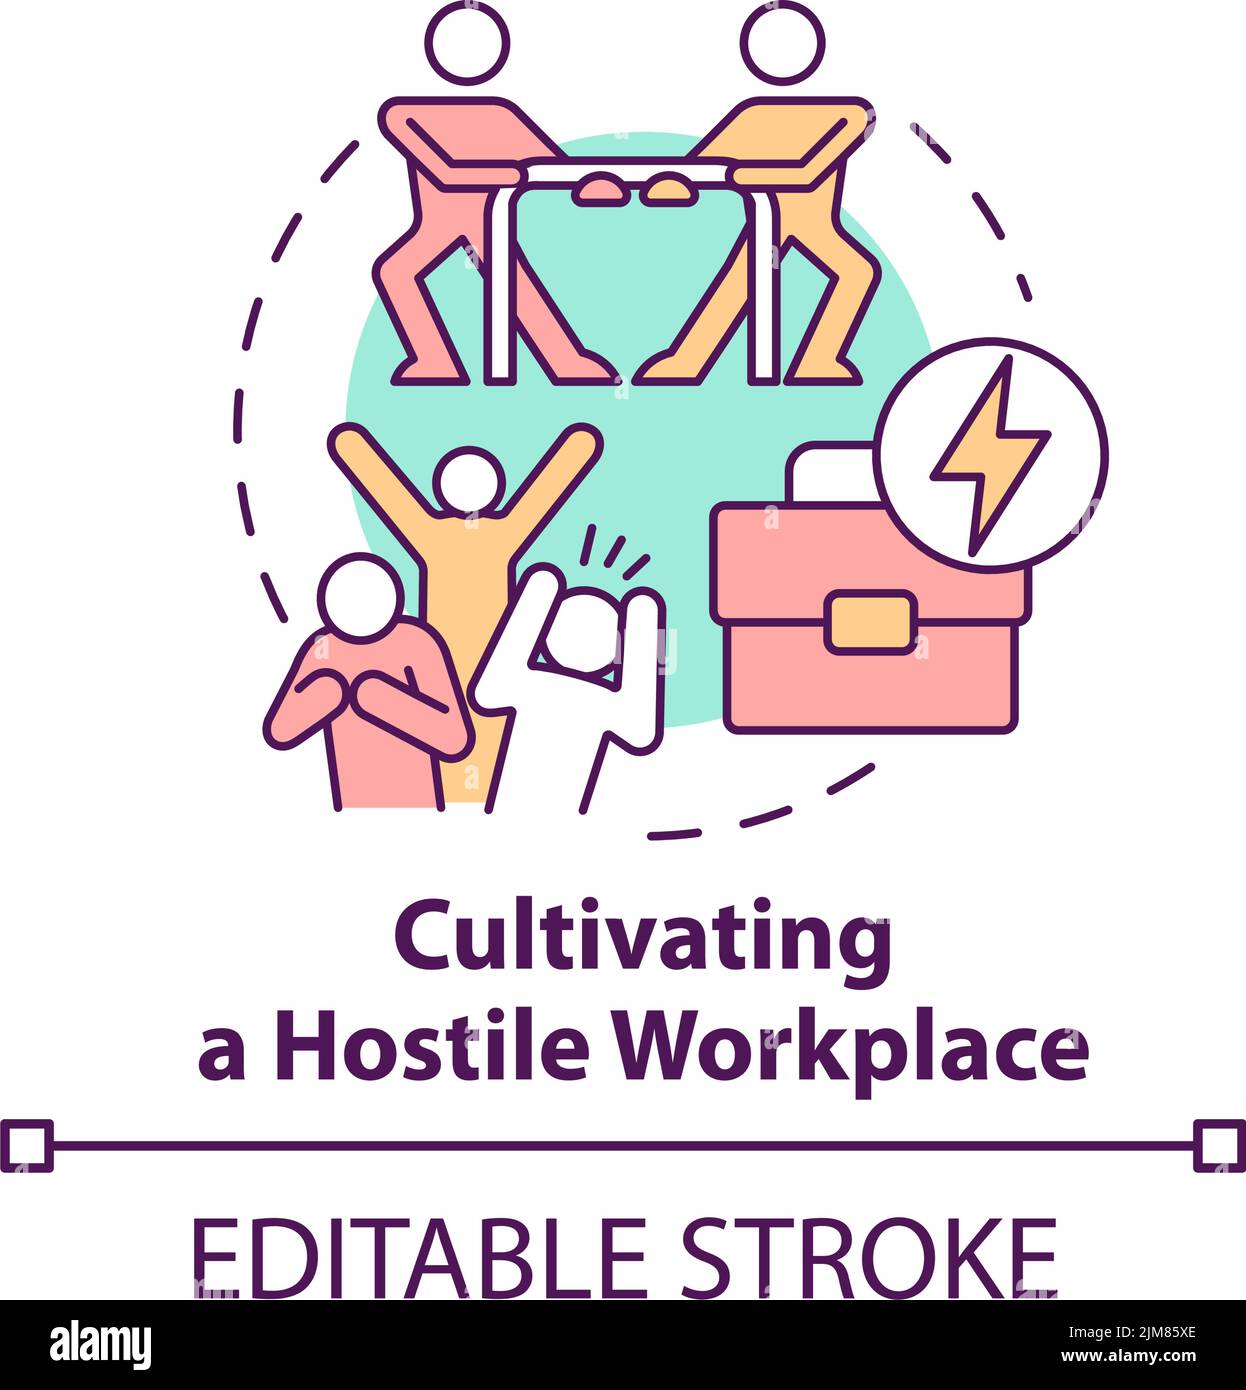 Cultivating hostile workplace concept icon Stock Vector